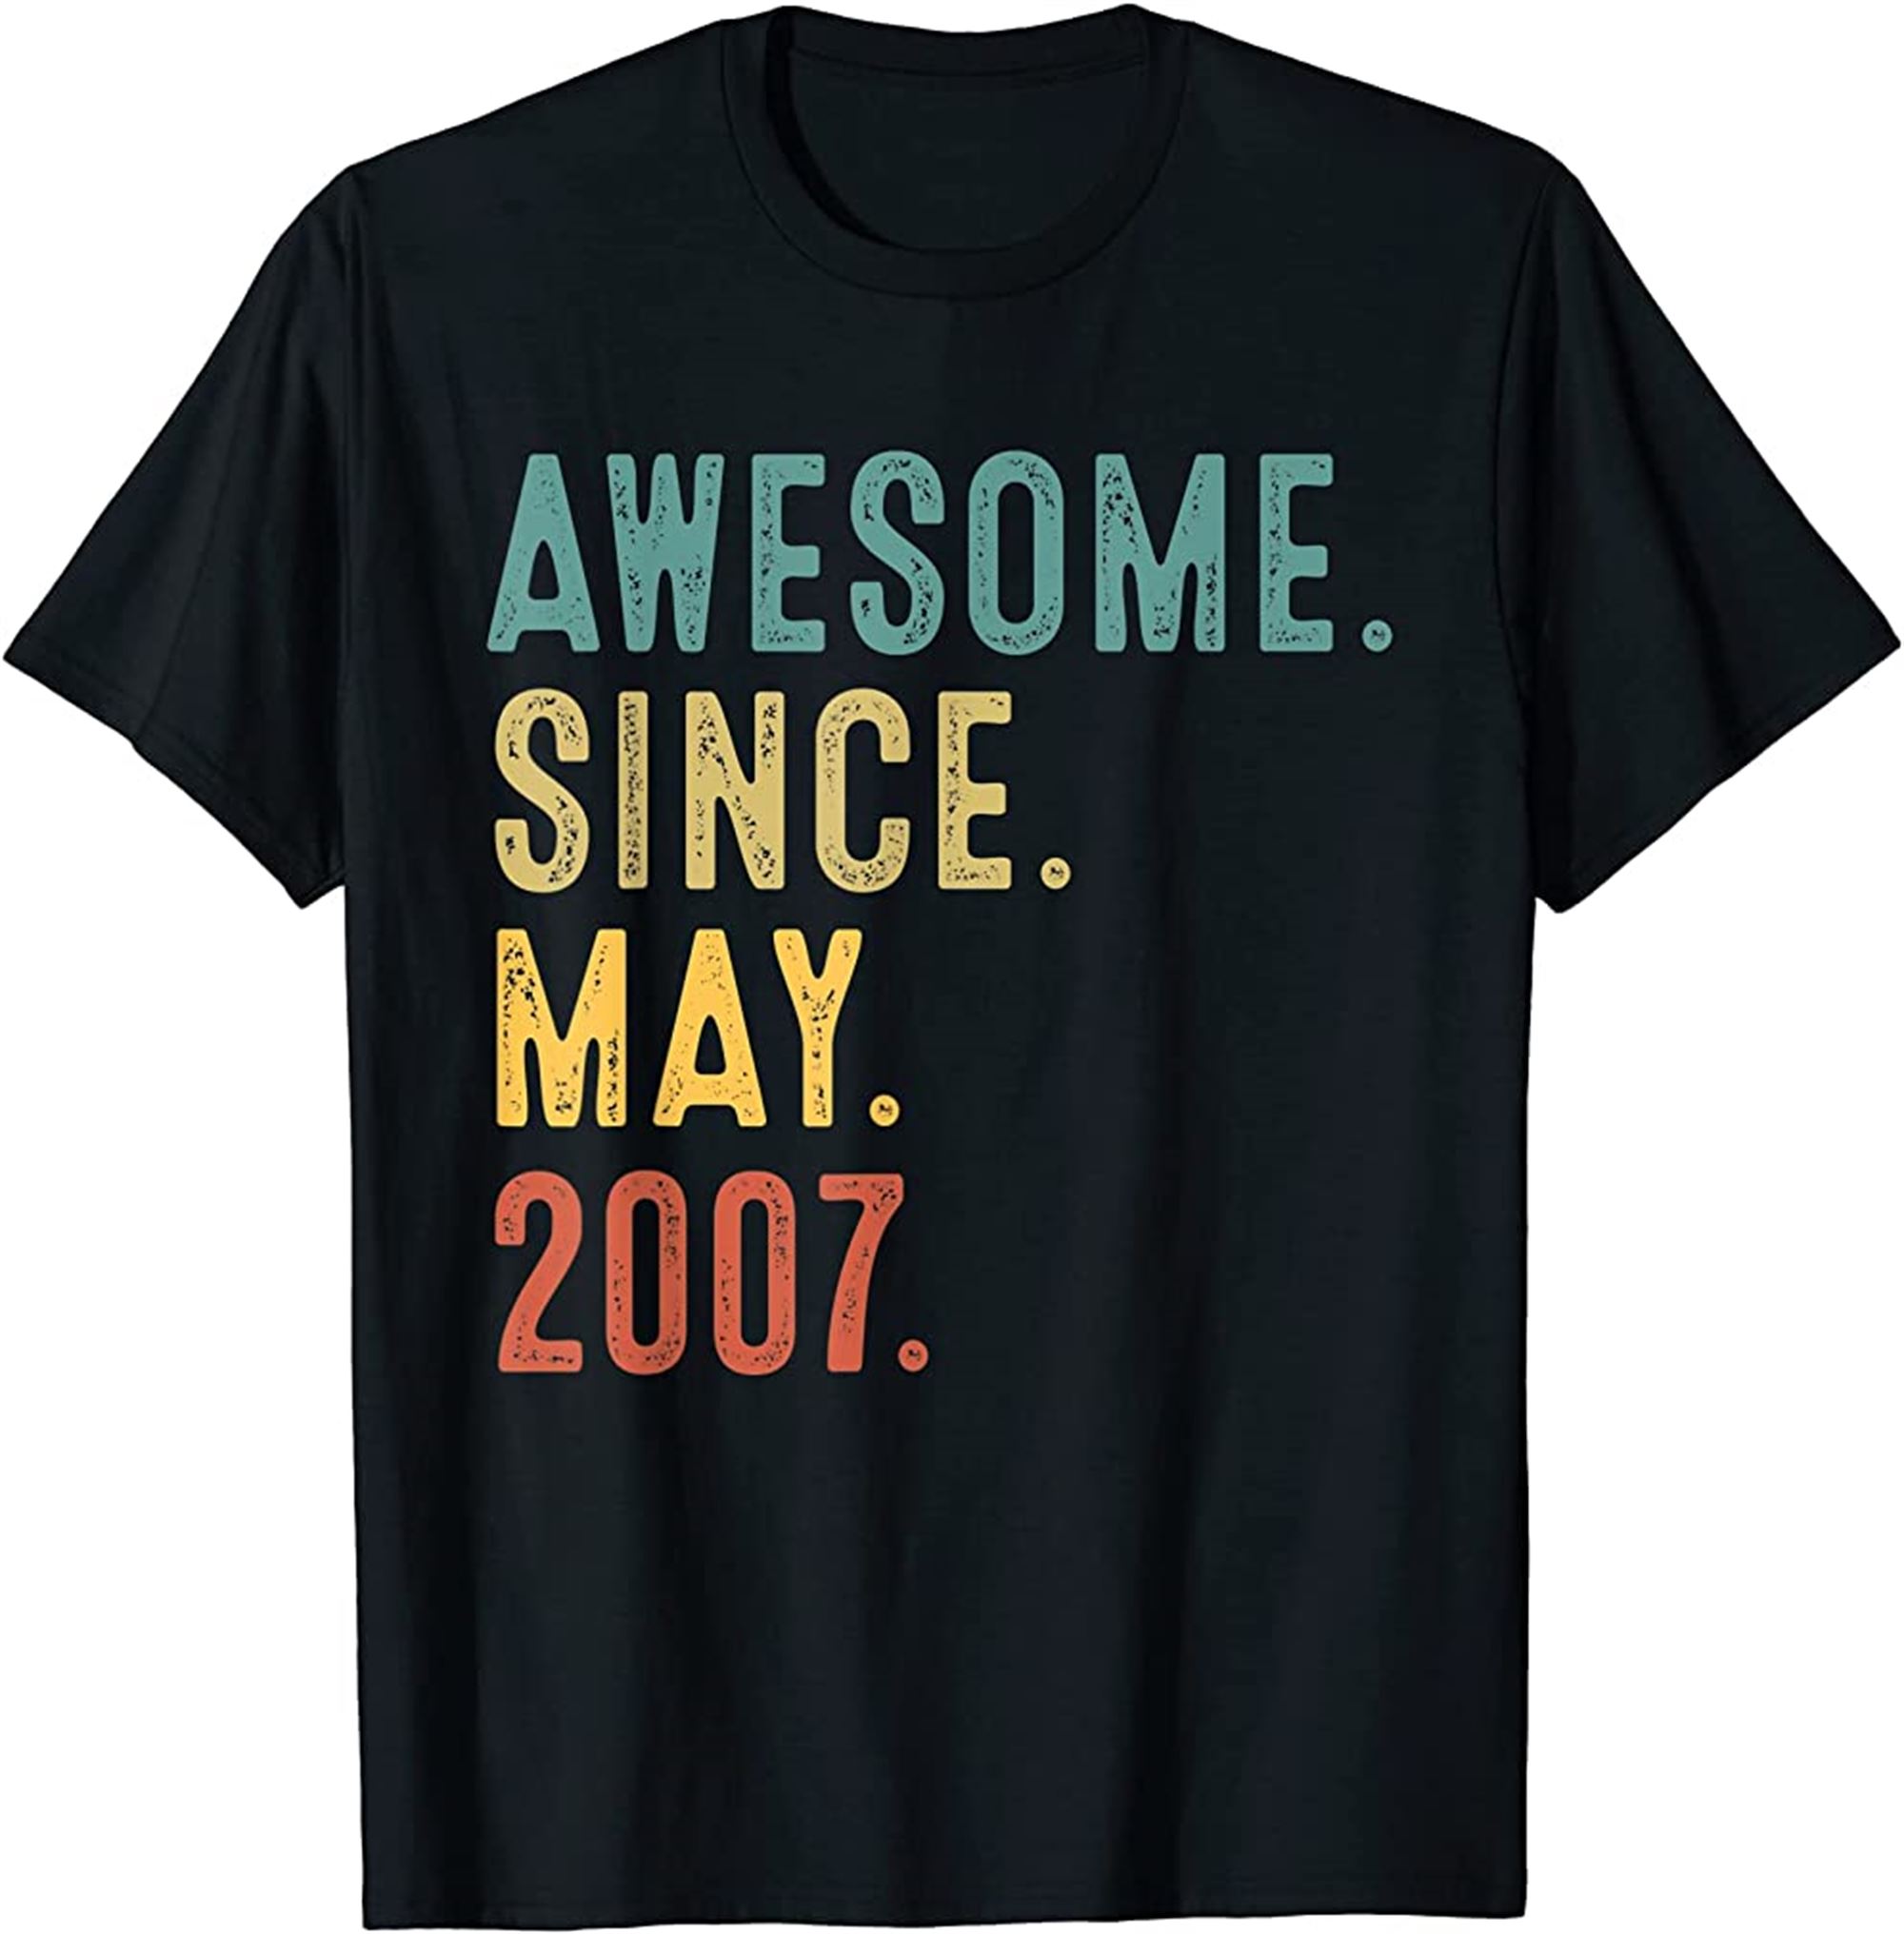 15 Years Old Gifts Awesome Since May 2007 15th Birthday T-shirt Full Size Up To 5xl